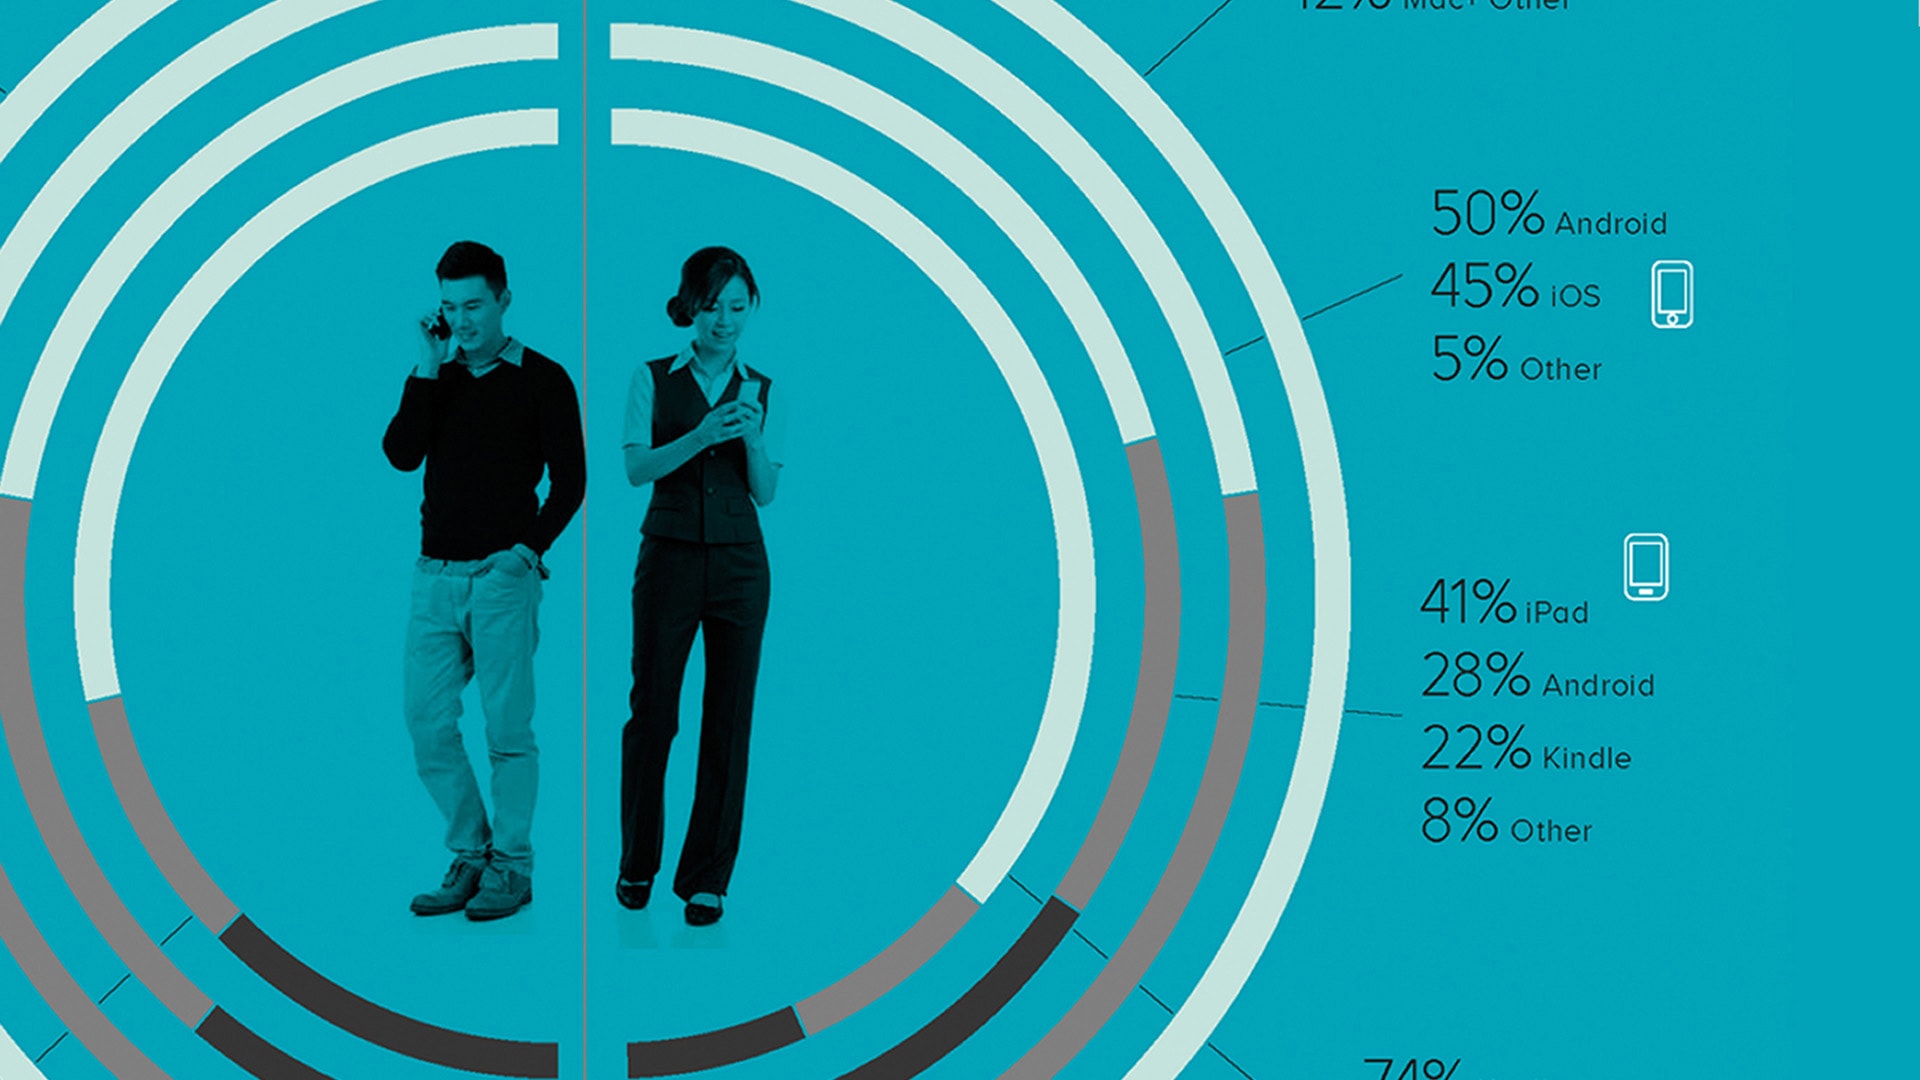 A section of the Verto Analytics Apple Android Dial Infographic